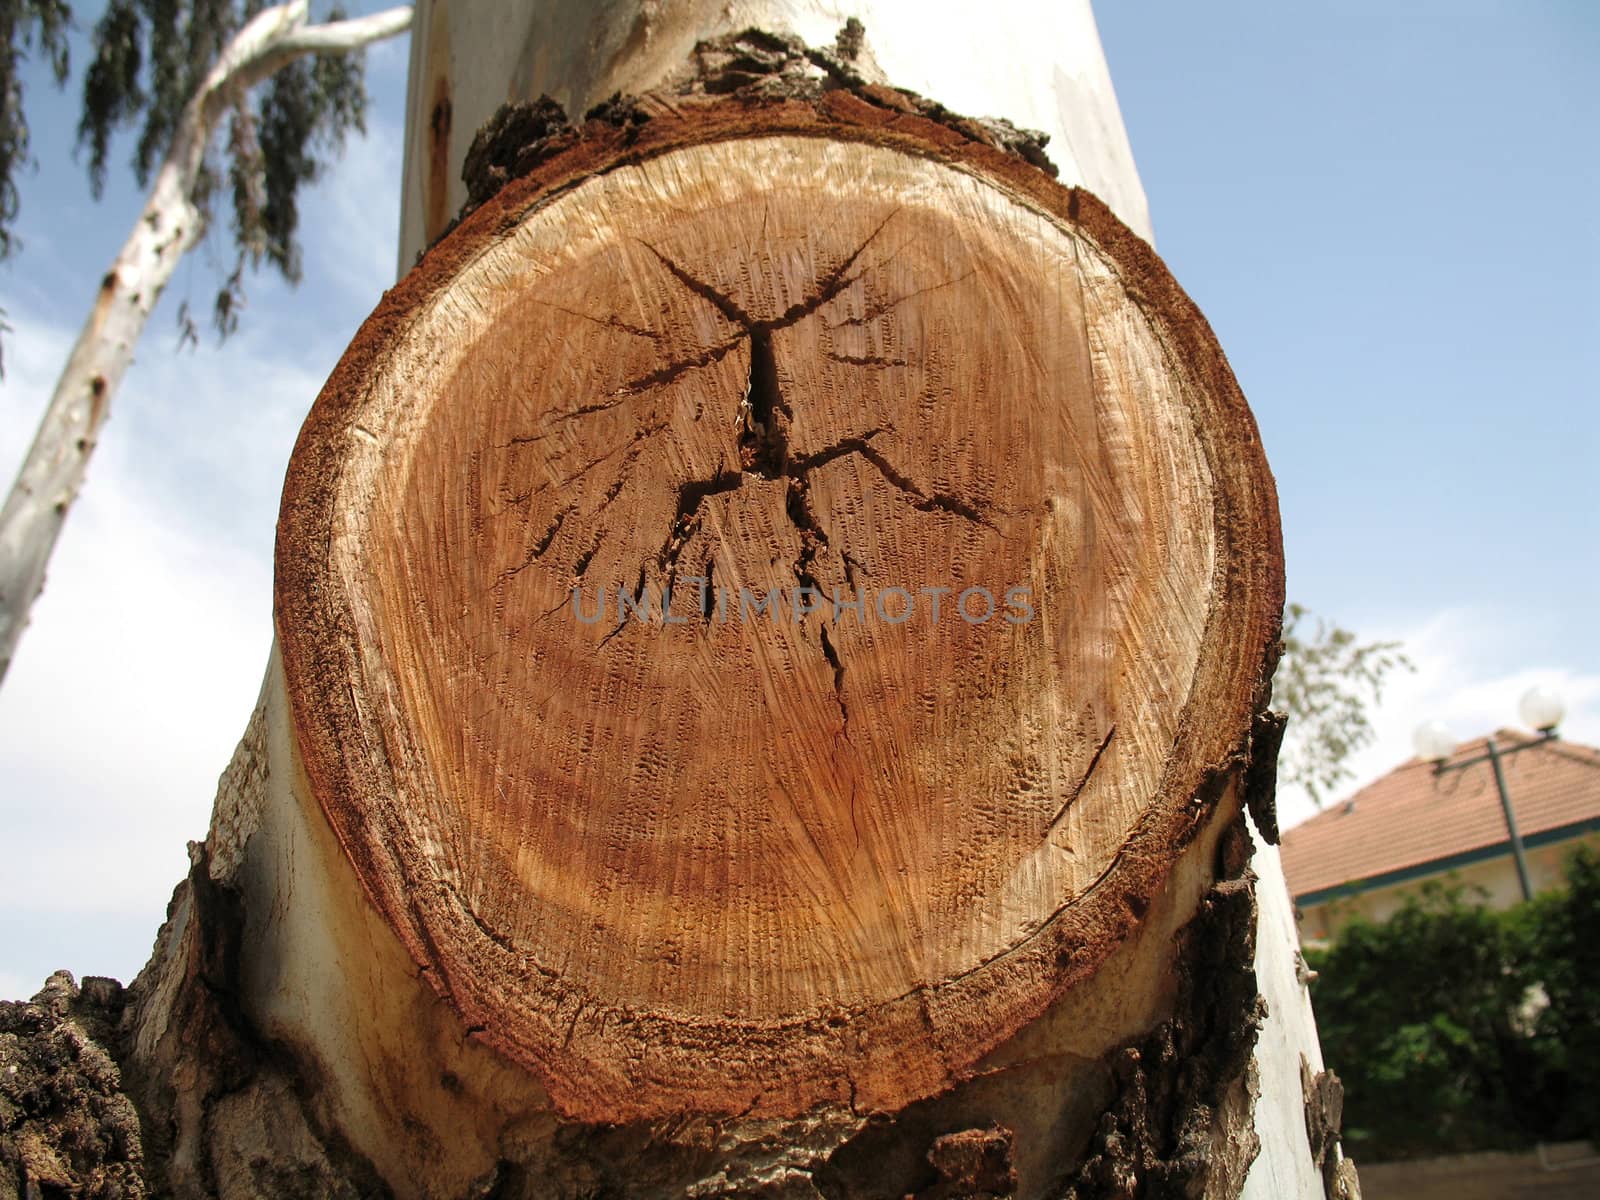 Close-up view of tree rings showing the age of the old pine tree